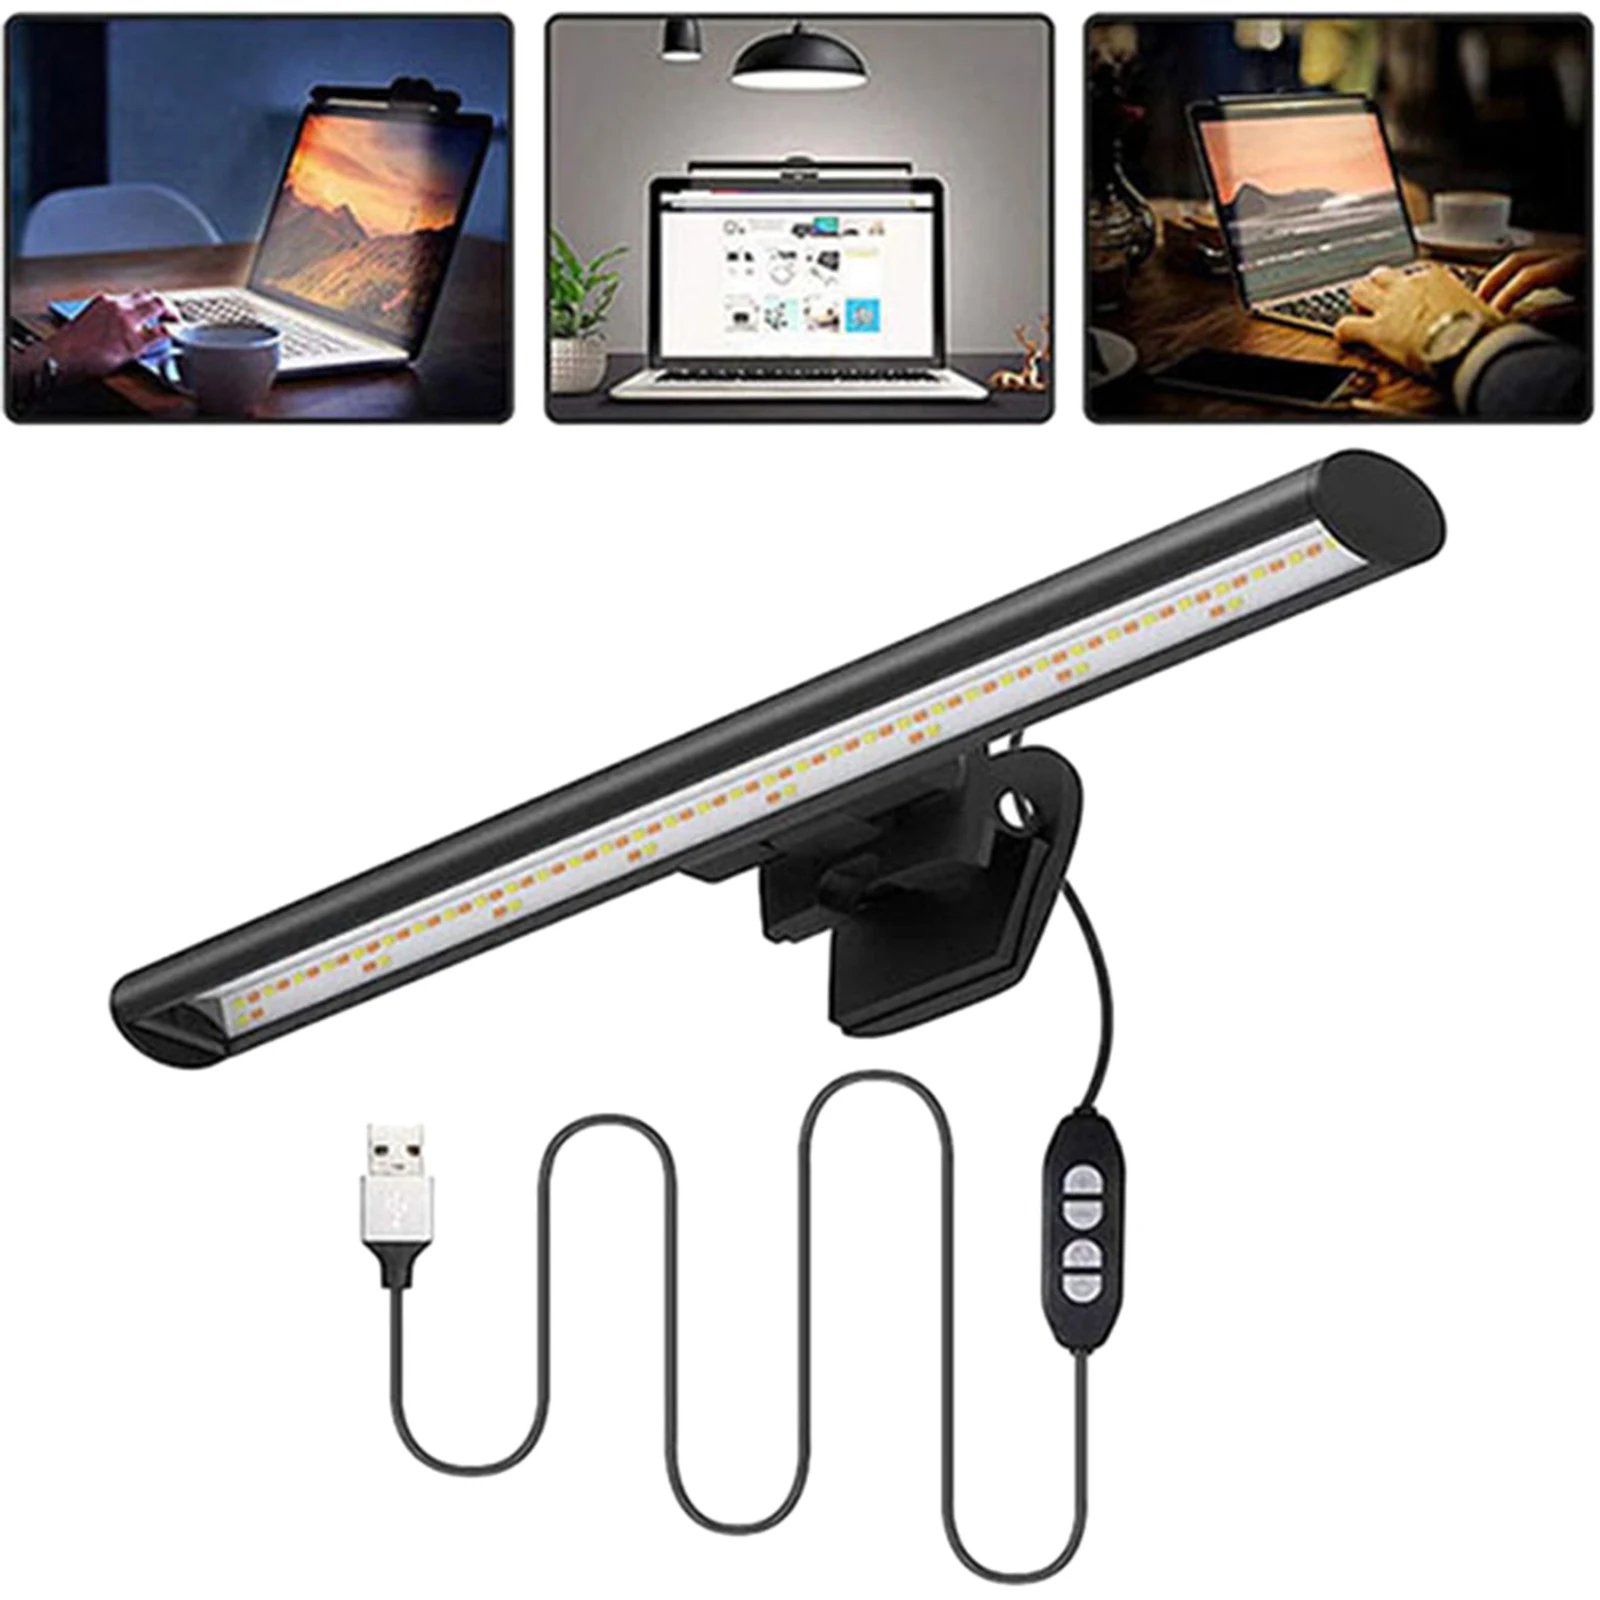 Computer Monitor Light USB Powered Desktop PC LED Screen Lamp Bar Dimmable E-reading Adjustable Home Bedroom Closet Cabinet